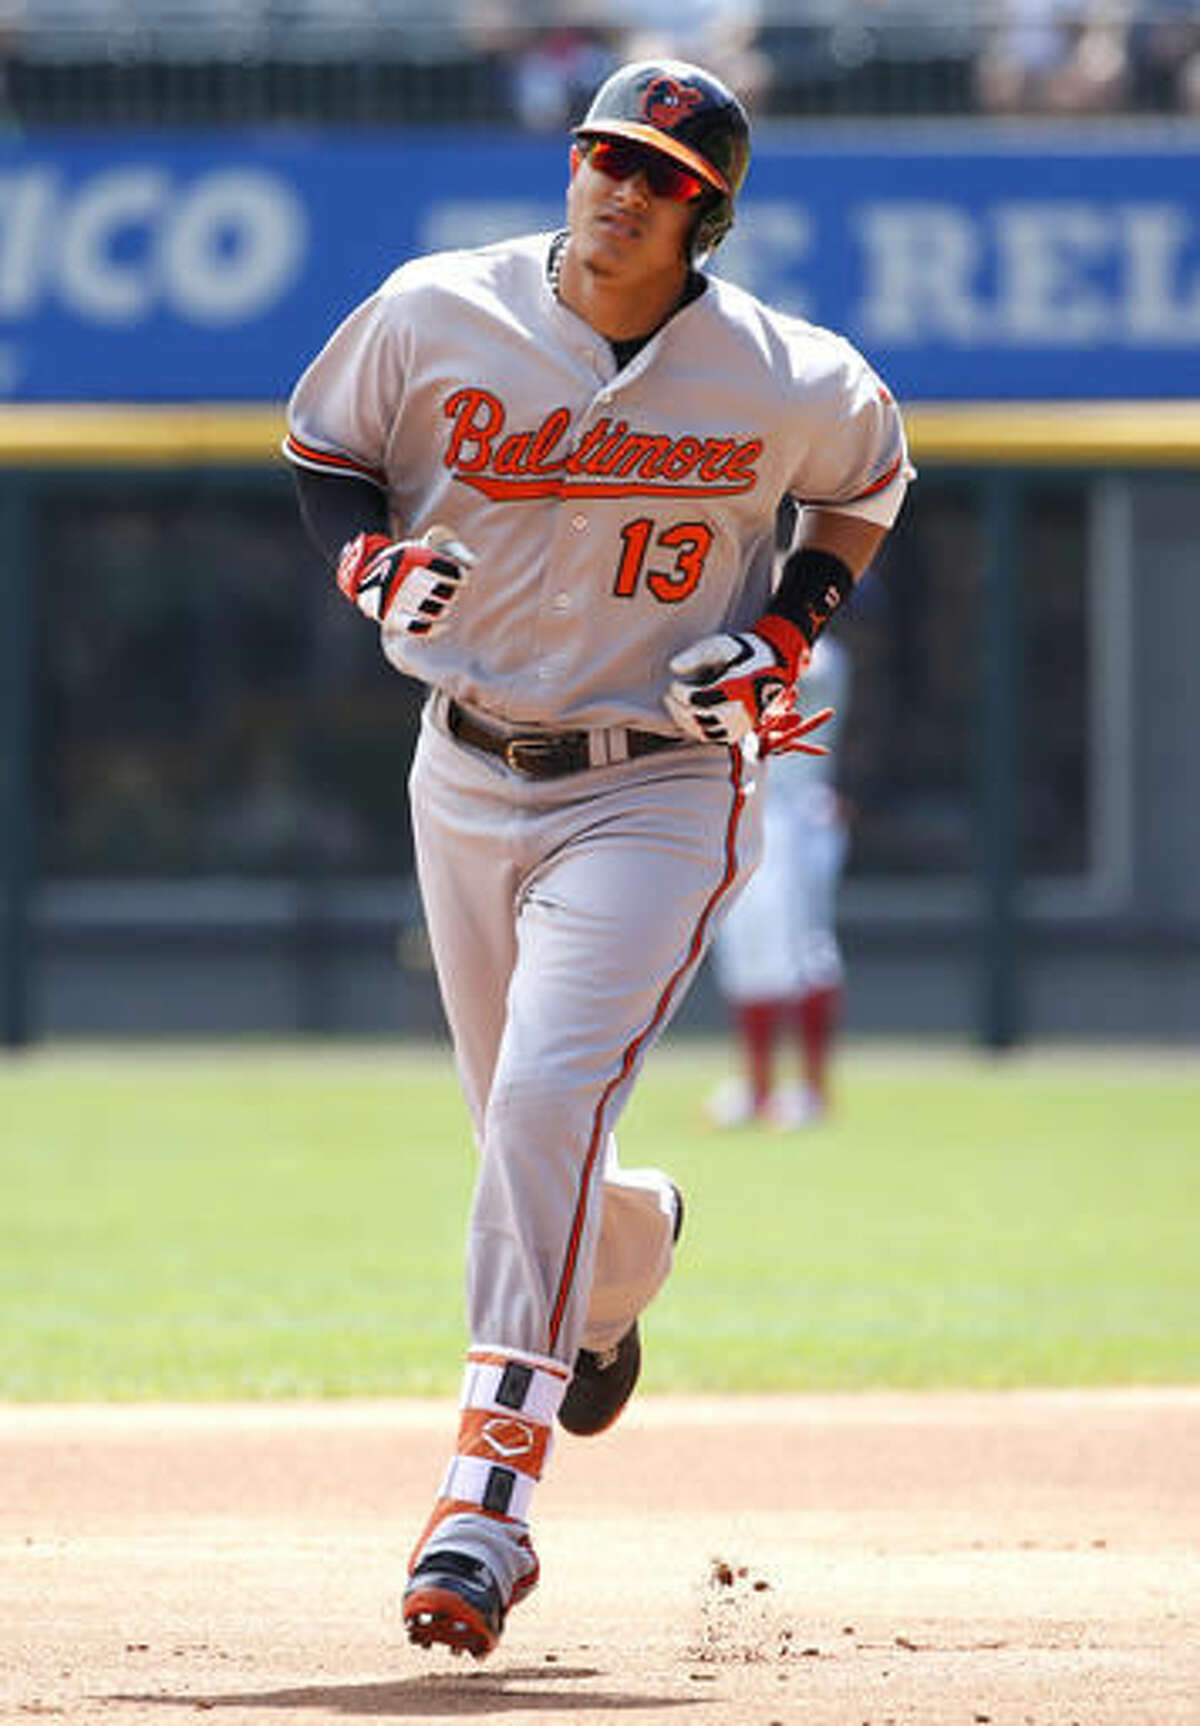 Baltimore Orioles' Manny Machado rounds the bases after hitting a two-run home run against the Chicago White Sox during the first inning of a baseball game in Chicago, Sunday, Aug. 7, 2016. (AP Photo/Nam Y. Huh)